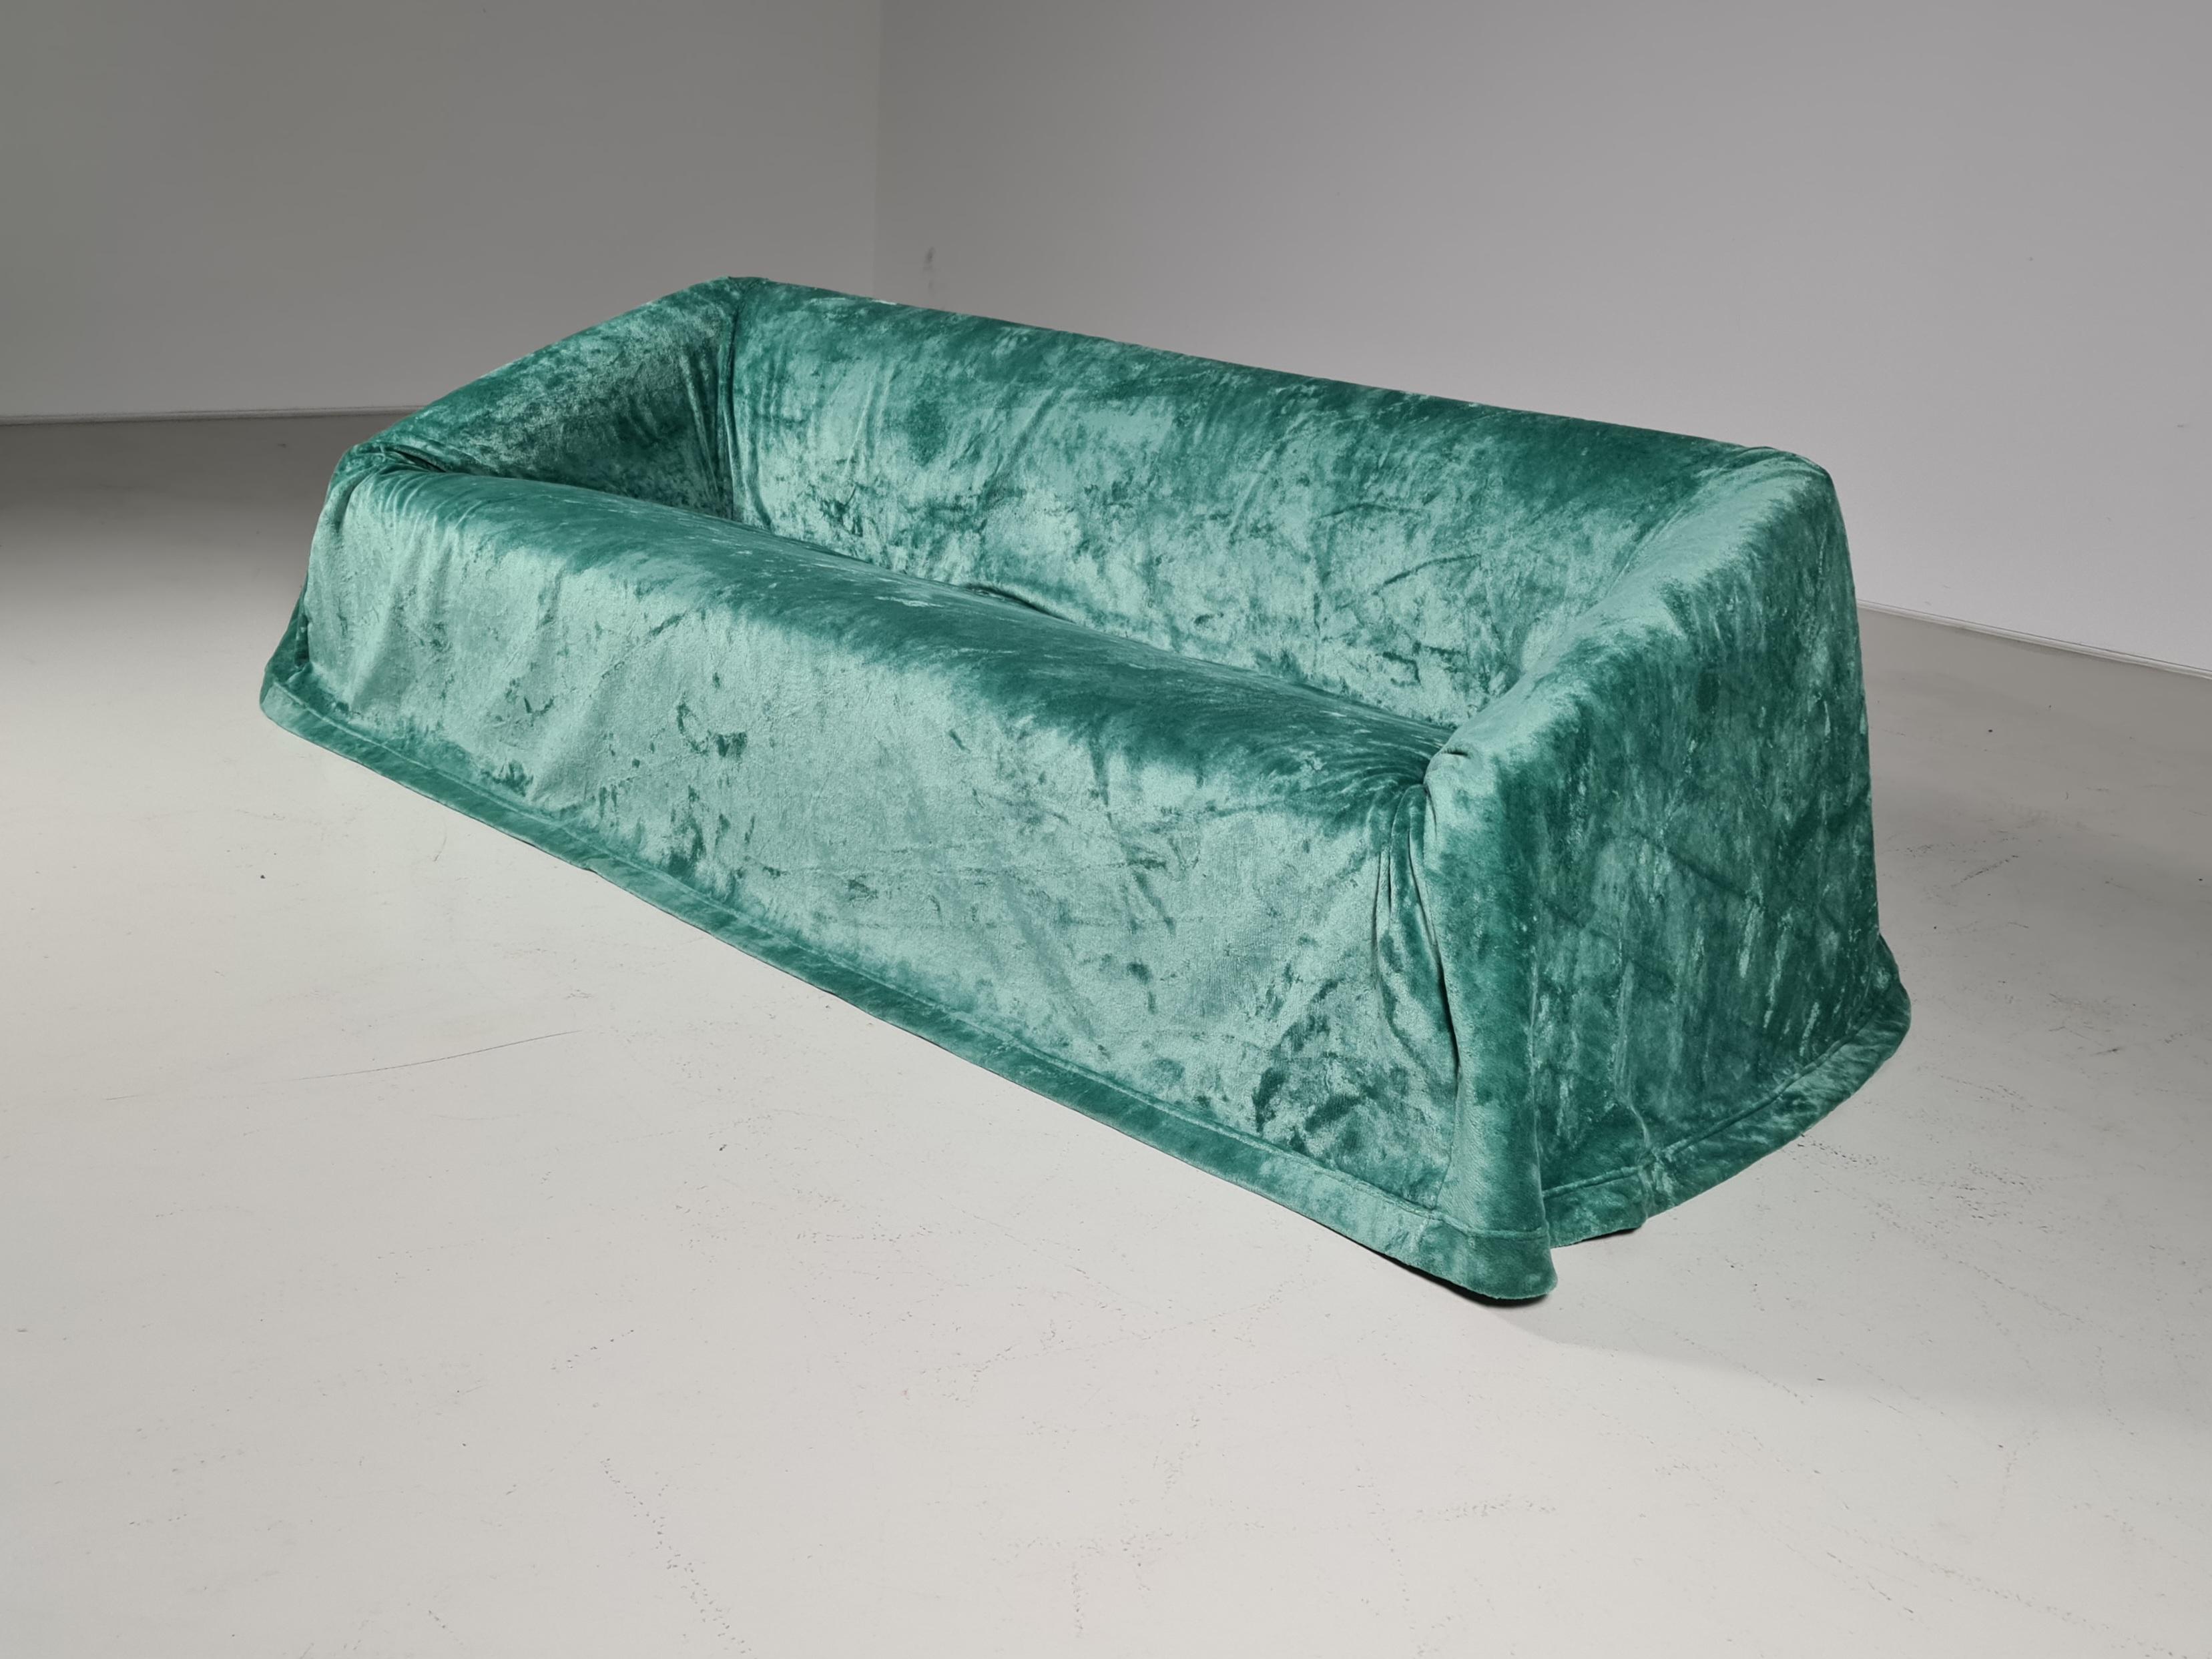 Mantilla sofa by Kazuhide Takahama for Simon Gavina. The Mantilla's name comes from the mantle which covers it. The idea comes from the memory of protecting the furniture of holiday mansions by covering them with fabrics during the winter months.